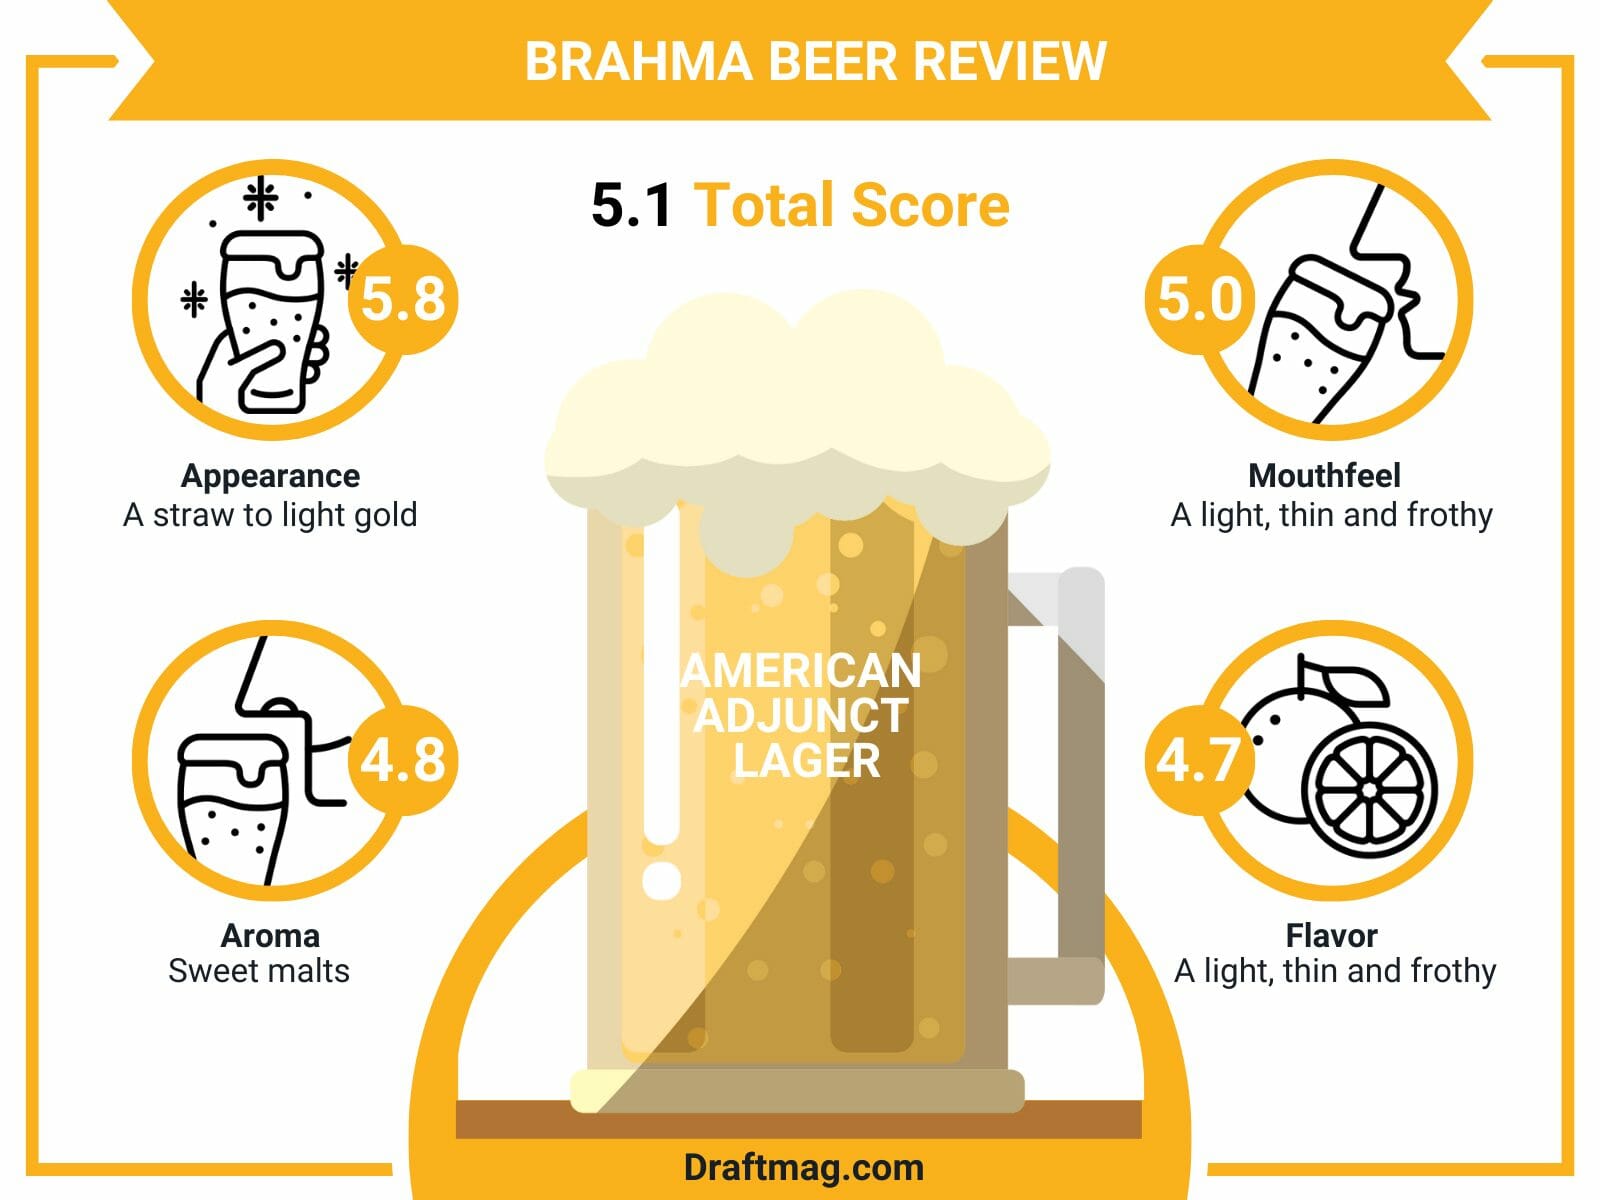 Brahma beer review infographic